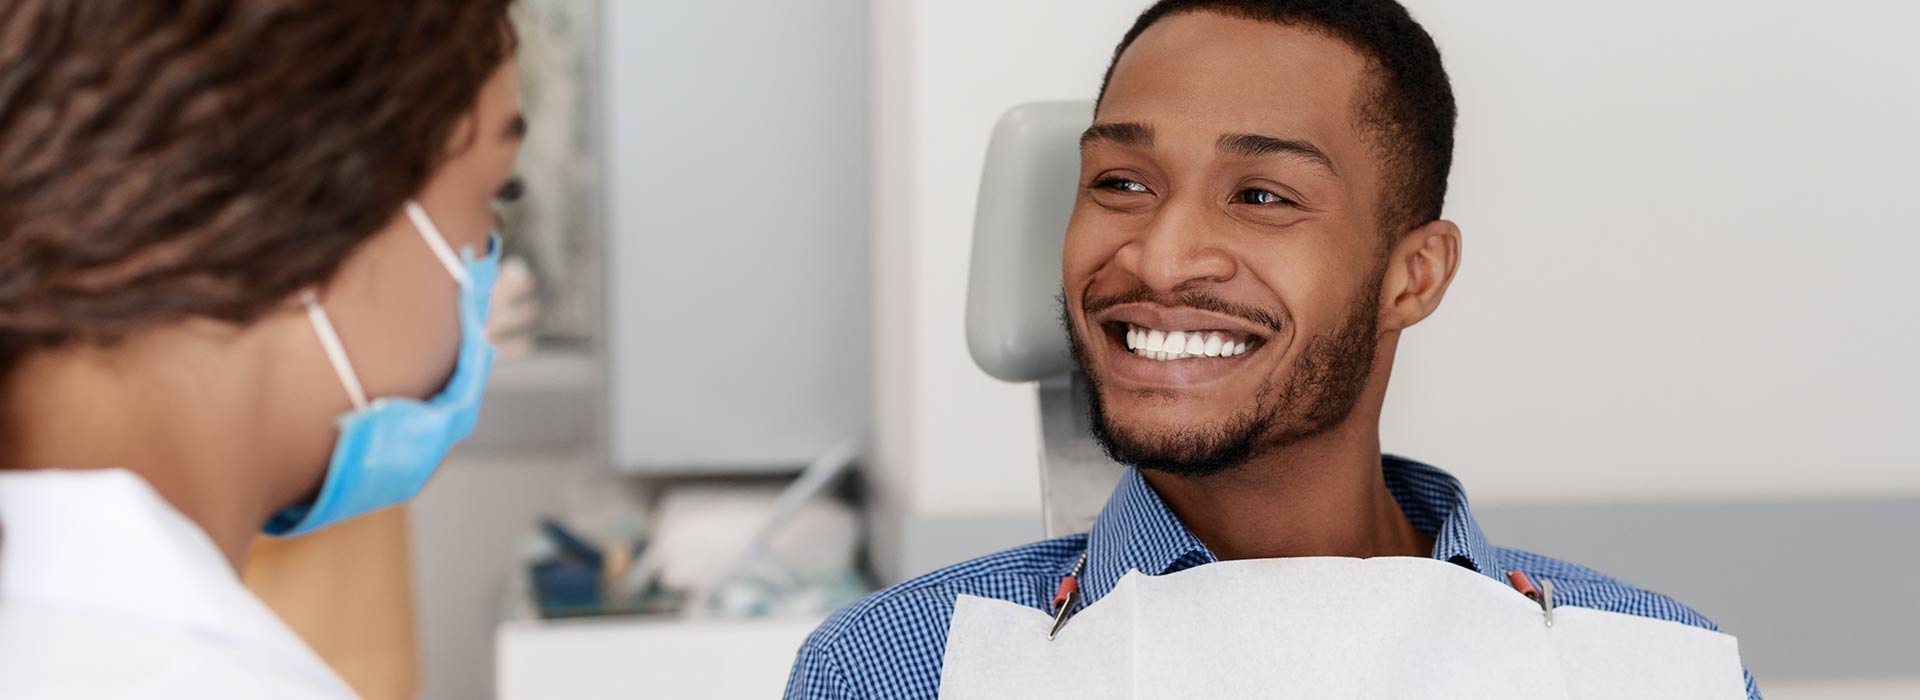 A man is smiling happily after tooth extractions.